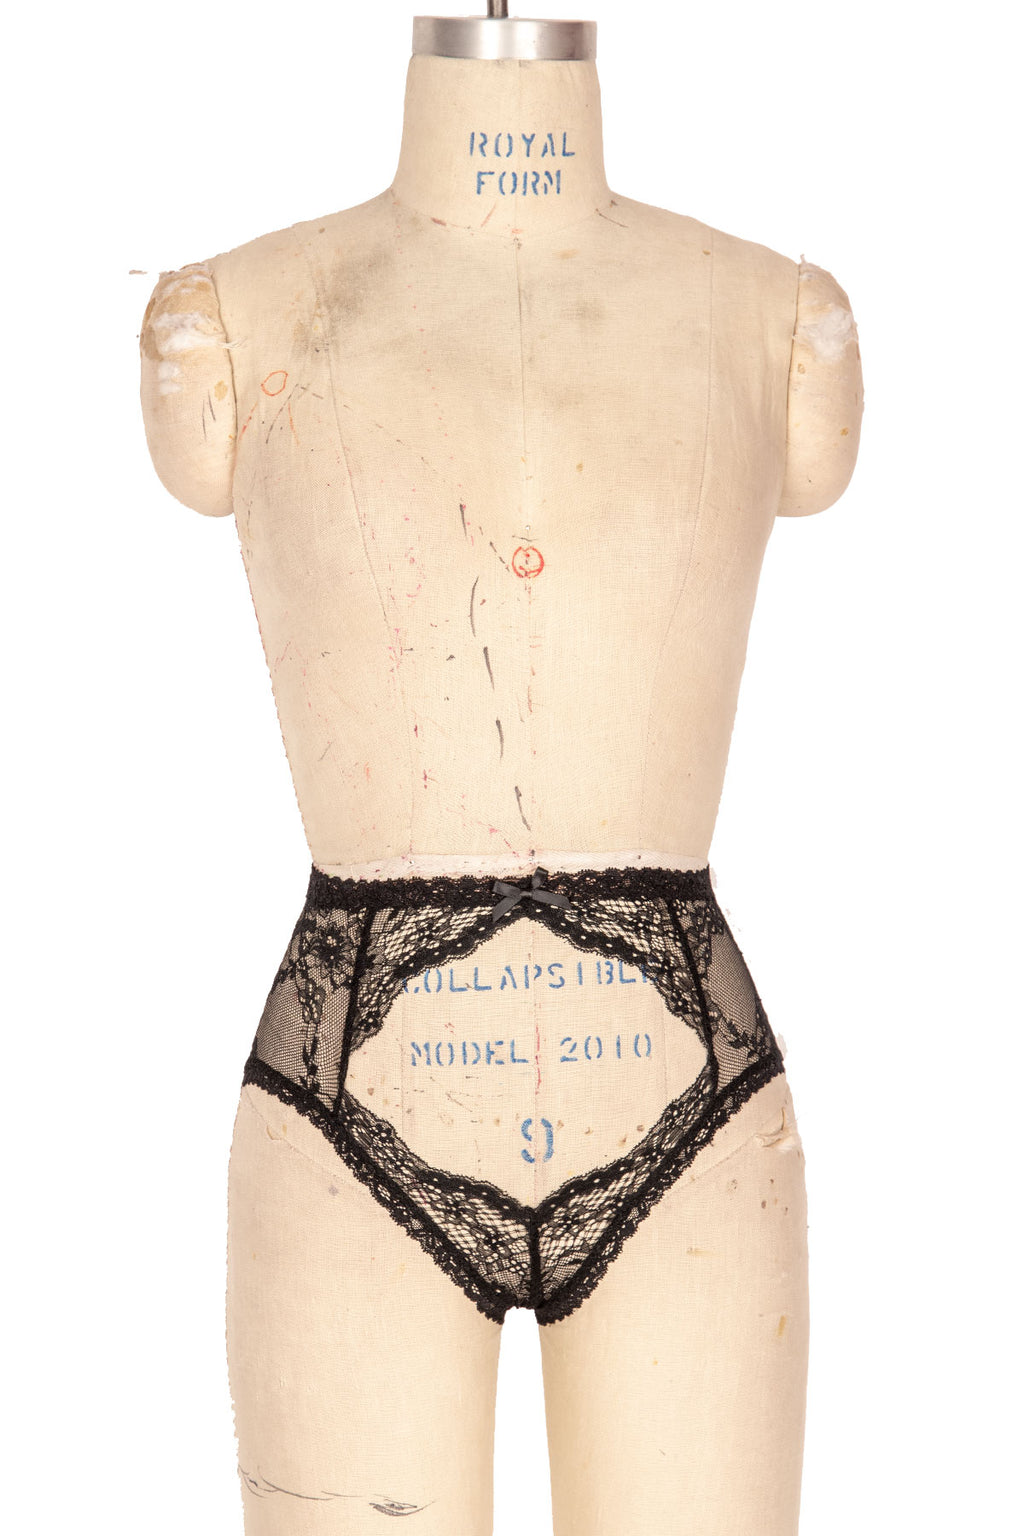 GRACE Lace High Waist Chic Brief Panties